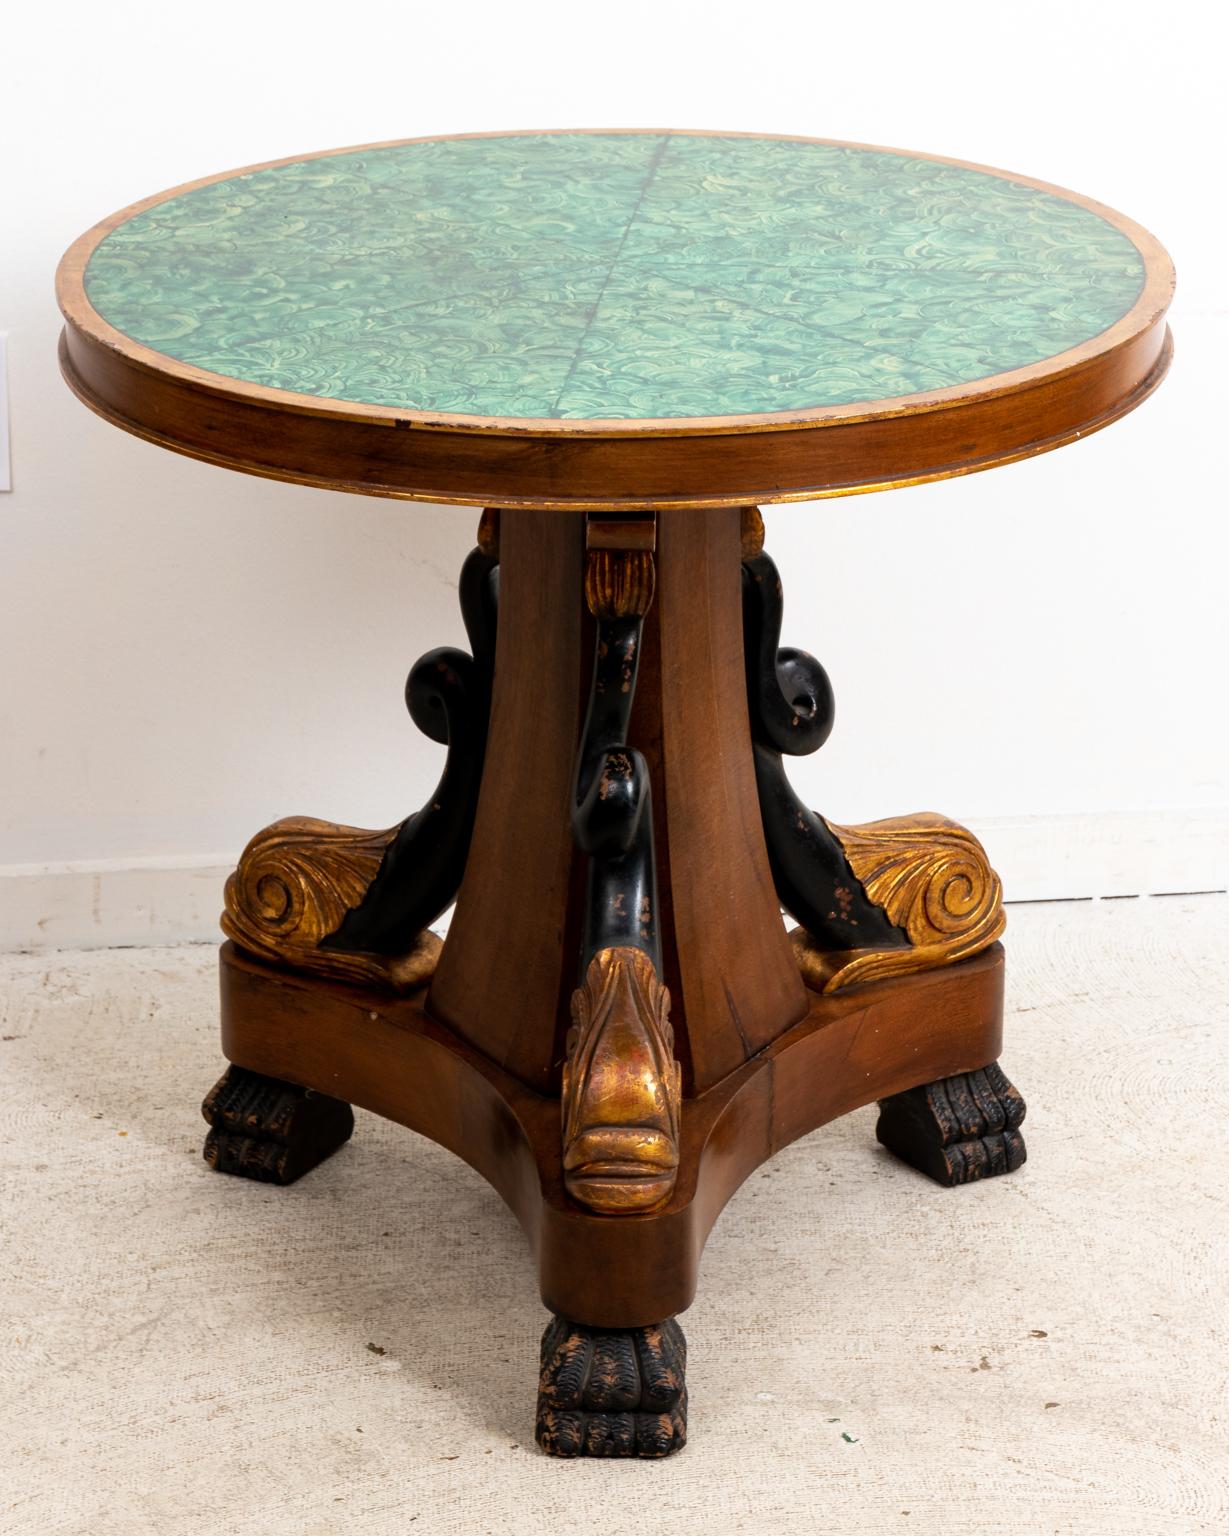 Neoclassical Round Table In Good Condition For Sale In Stamford, CT